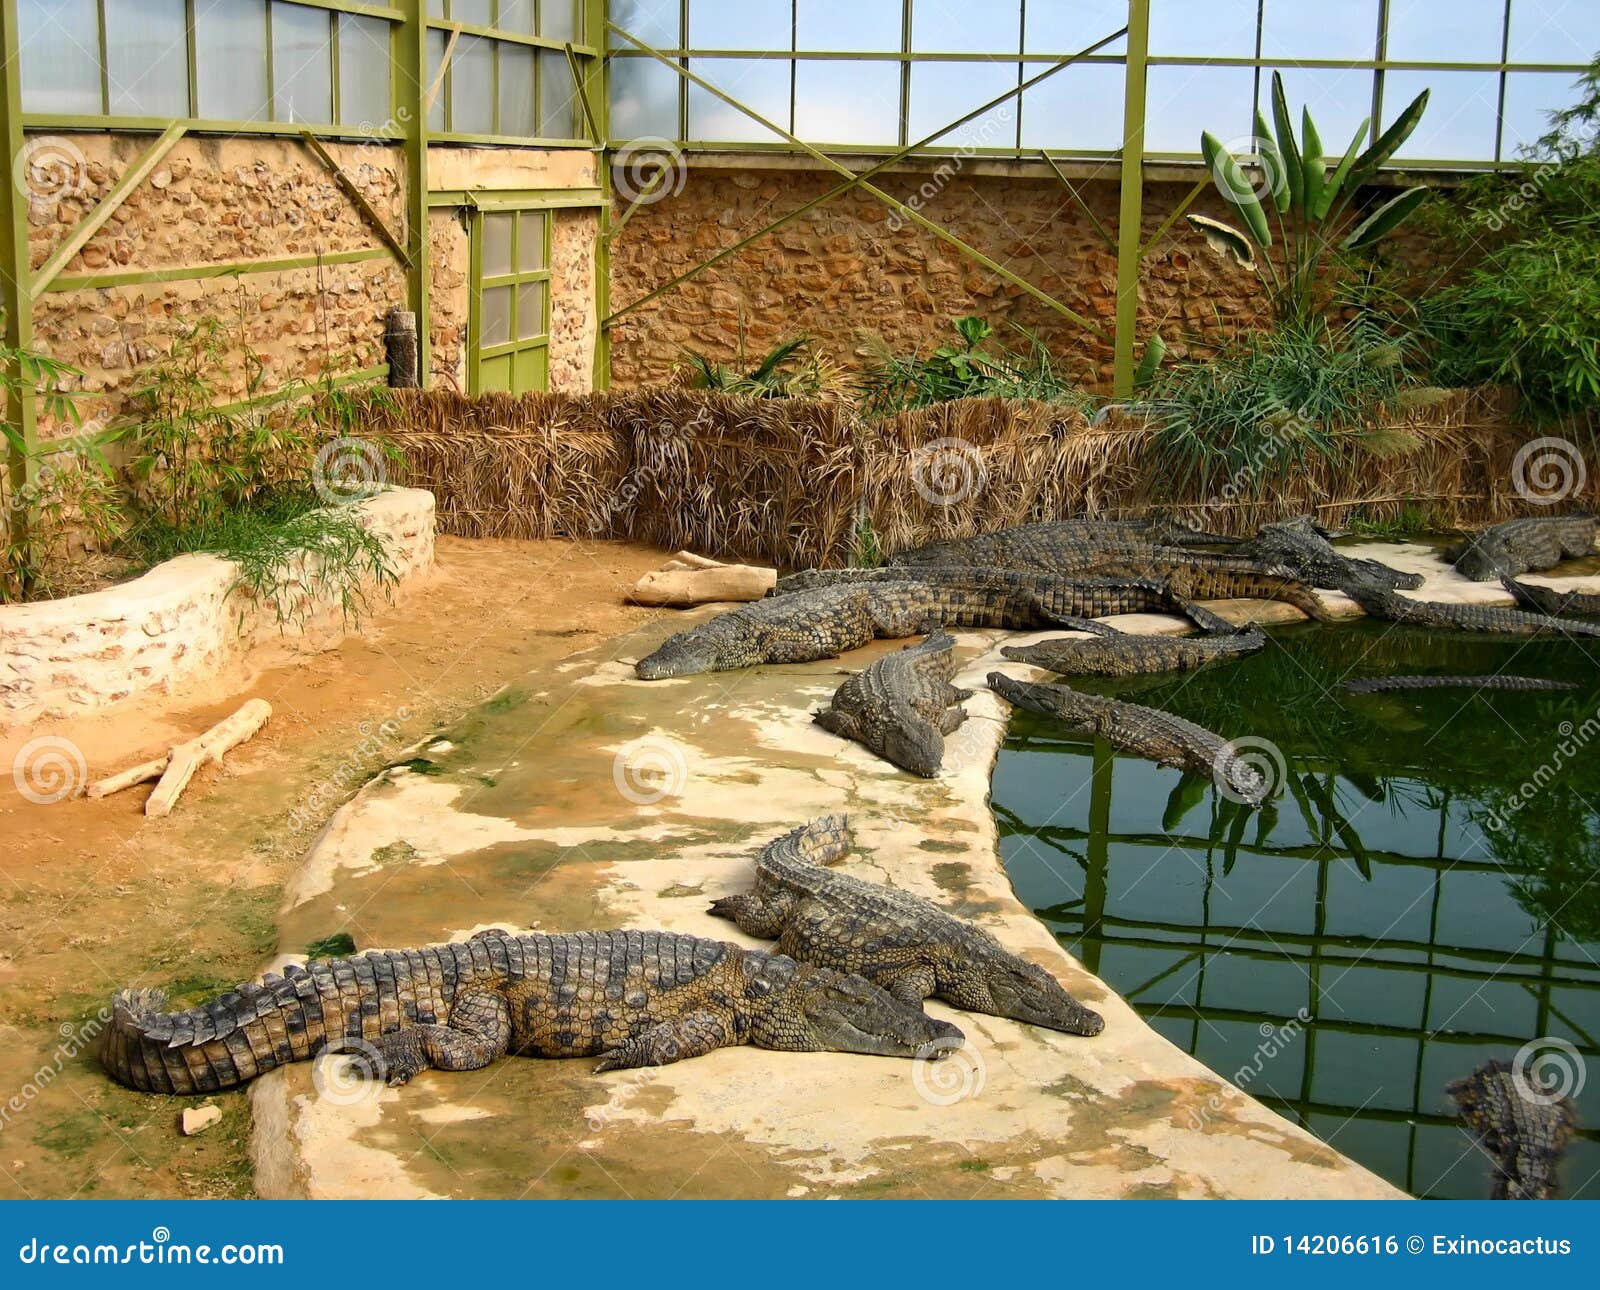 the crocodiles in winter pavilion on the farm on d